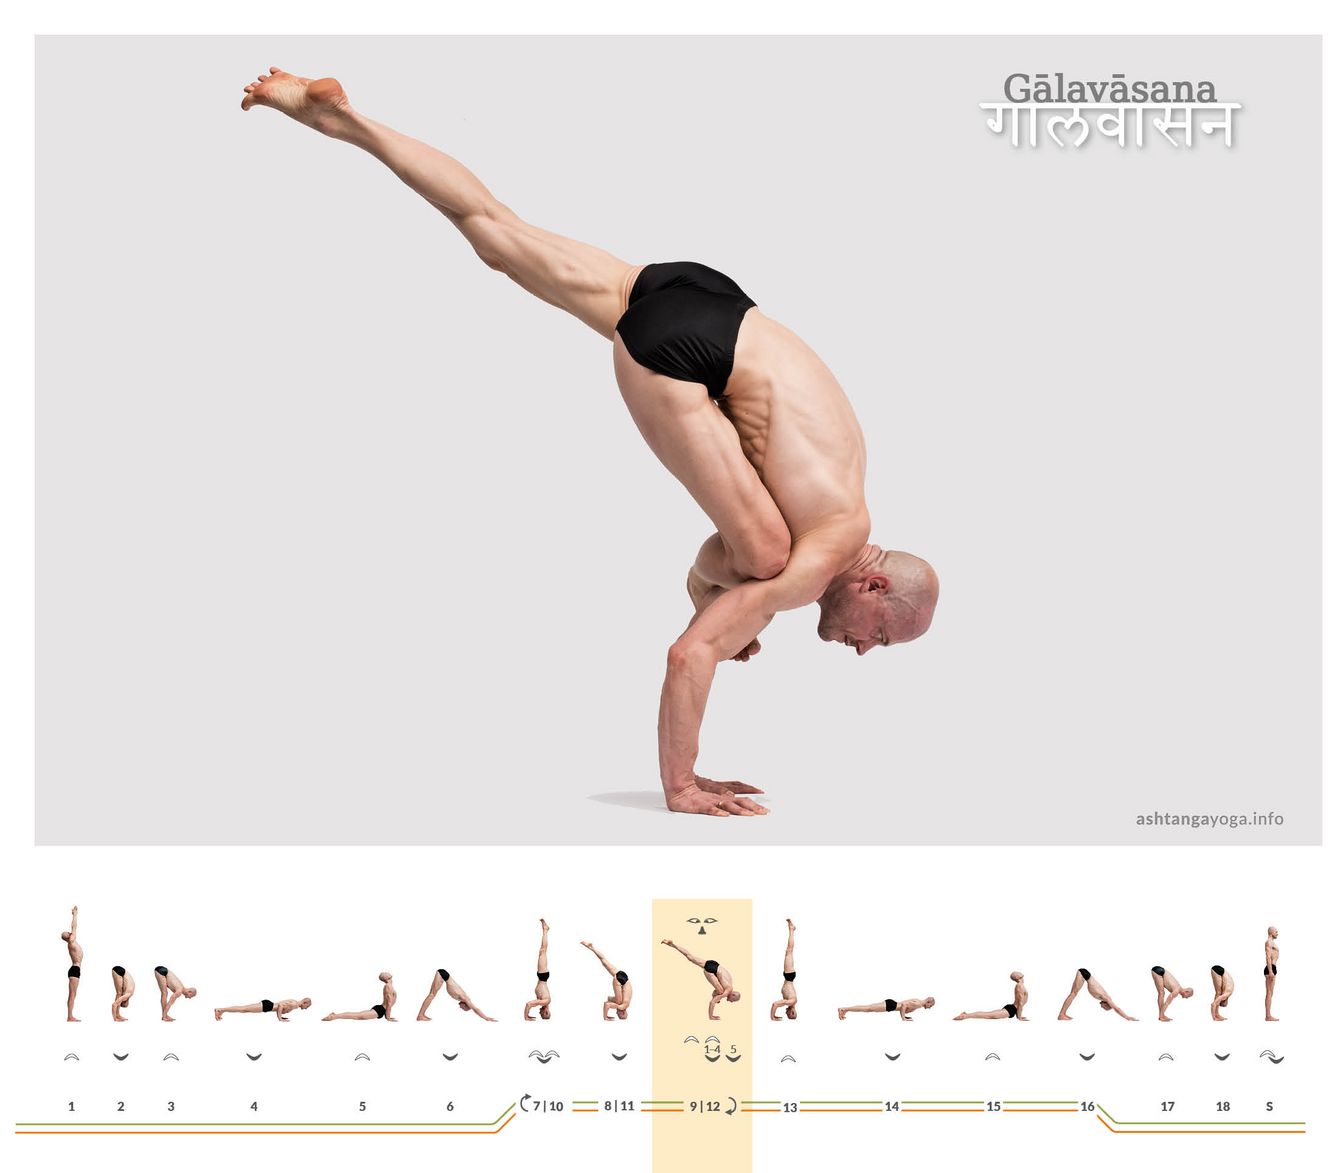 The pose dedicated to Galava, Galavasana, is an arm balance where one shin rests on the upper arms while the other leg extends upward in line with the torso.